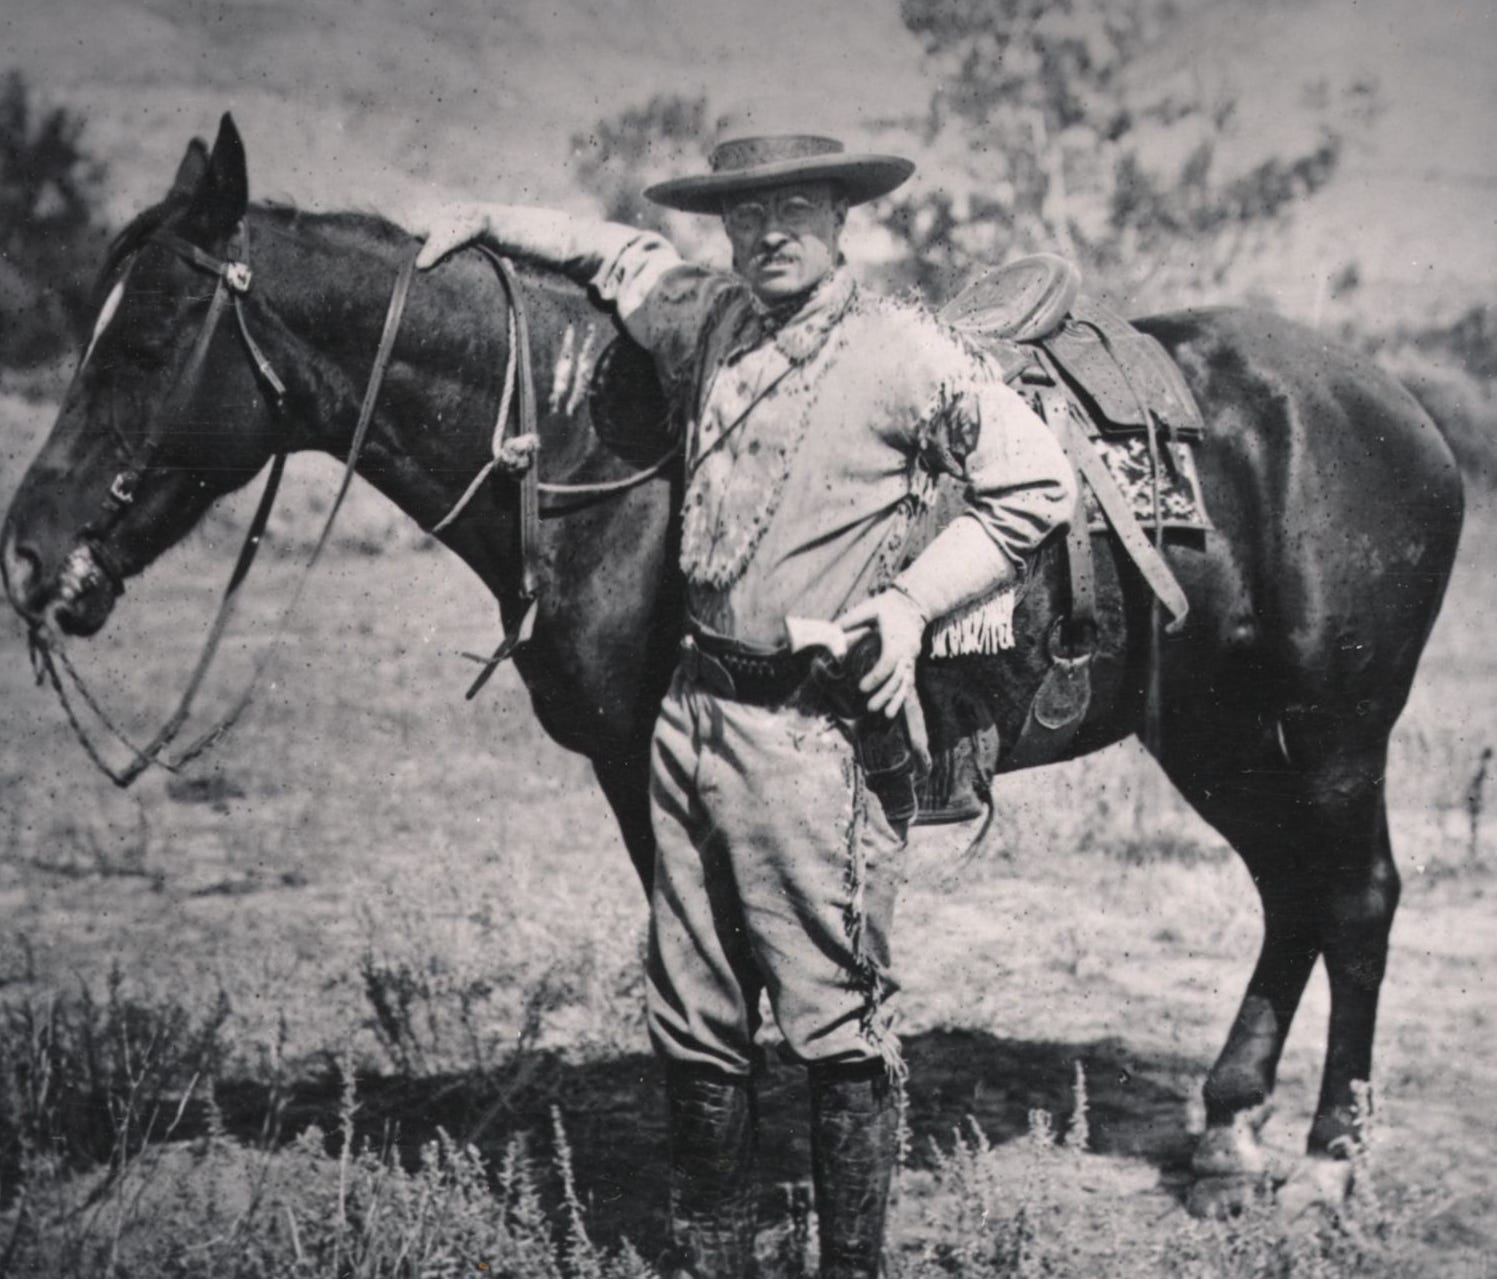 President Theodore Roosevelt stands with a saddled horse in the Badlands of western North Dakota.